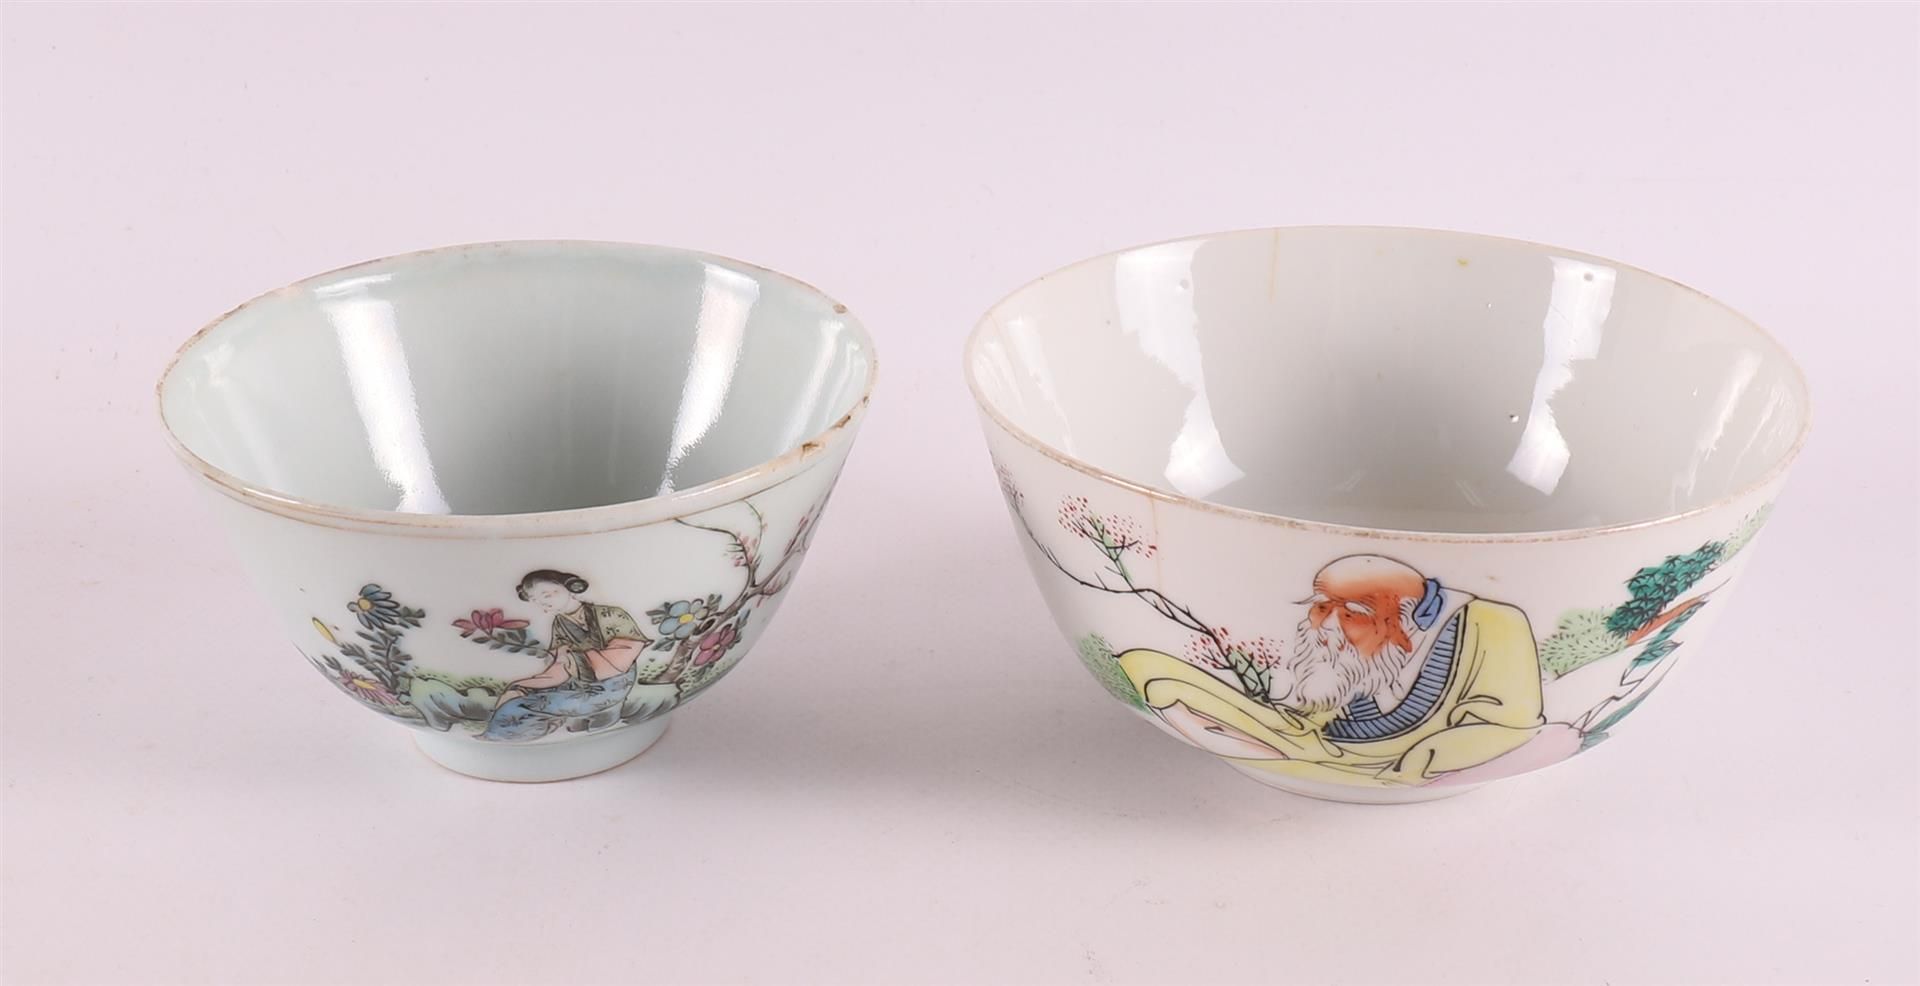 Two porcelain bowls on stand ring, China 19th and 20th century. Polychrome decoration of figures